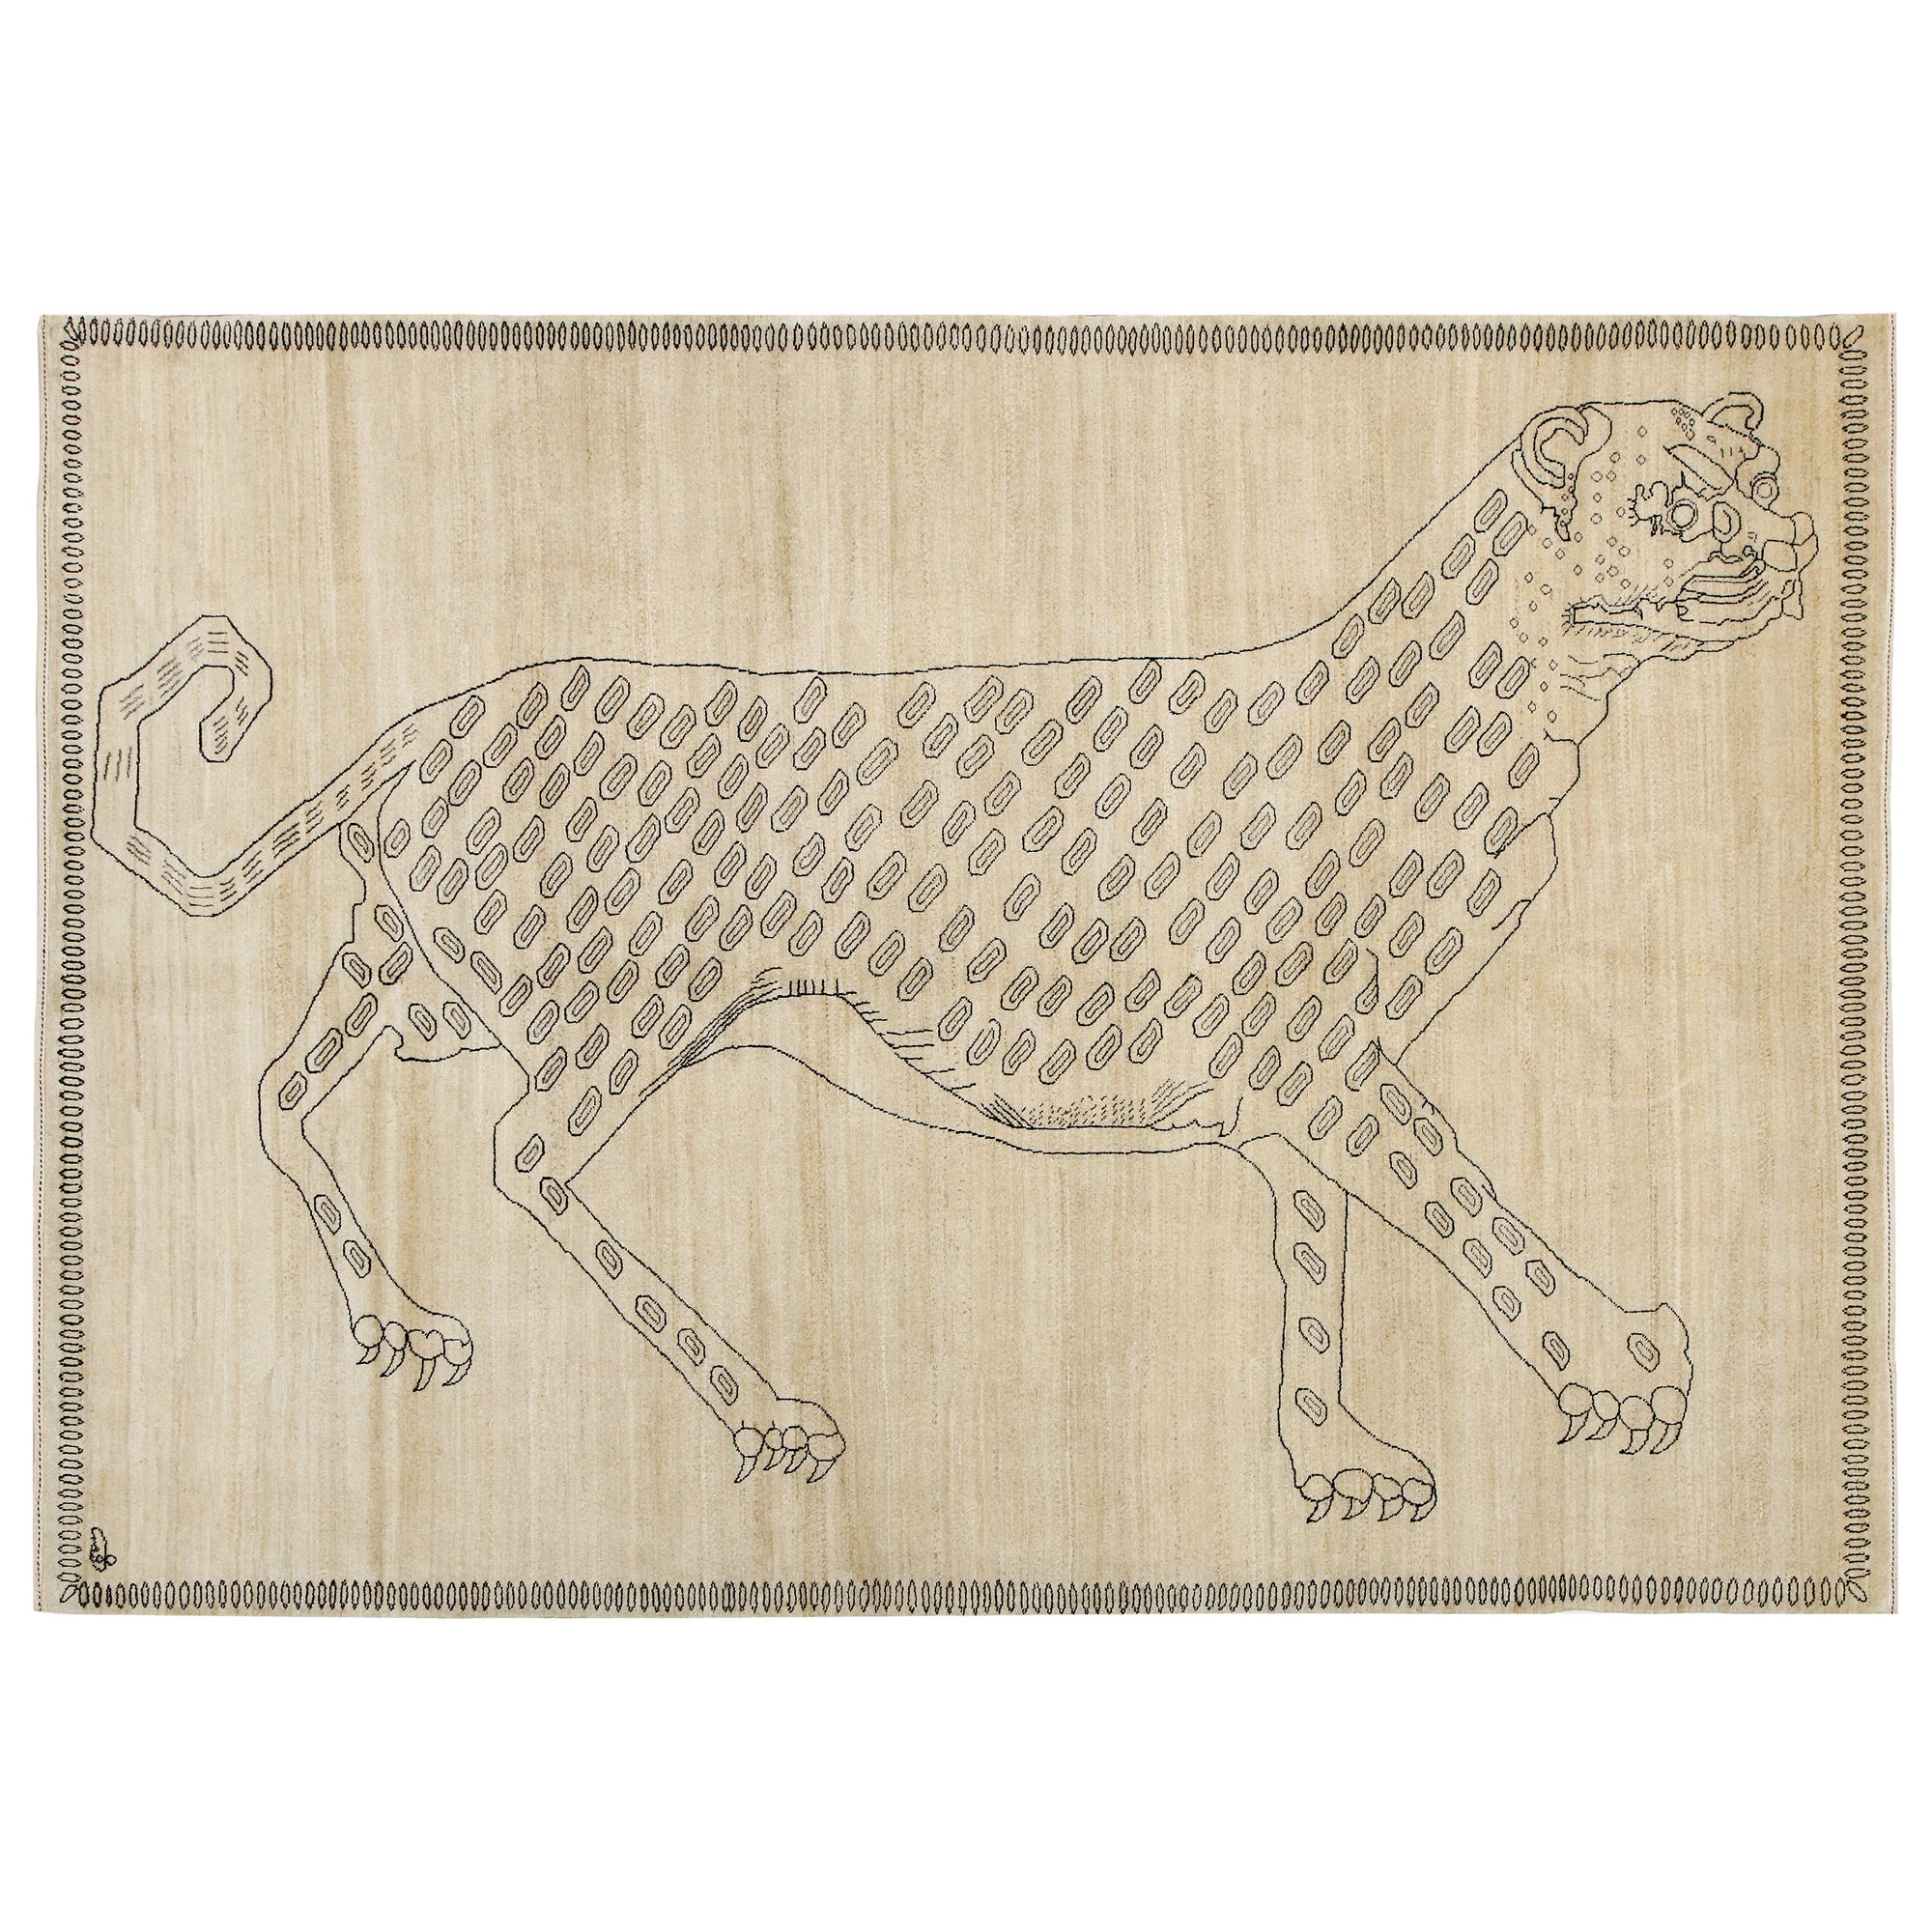 Orley Shabahang "Leopard" Persian Rug, Wool and Silk, Cream and Gray, 6' x 9' For Sale